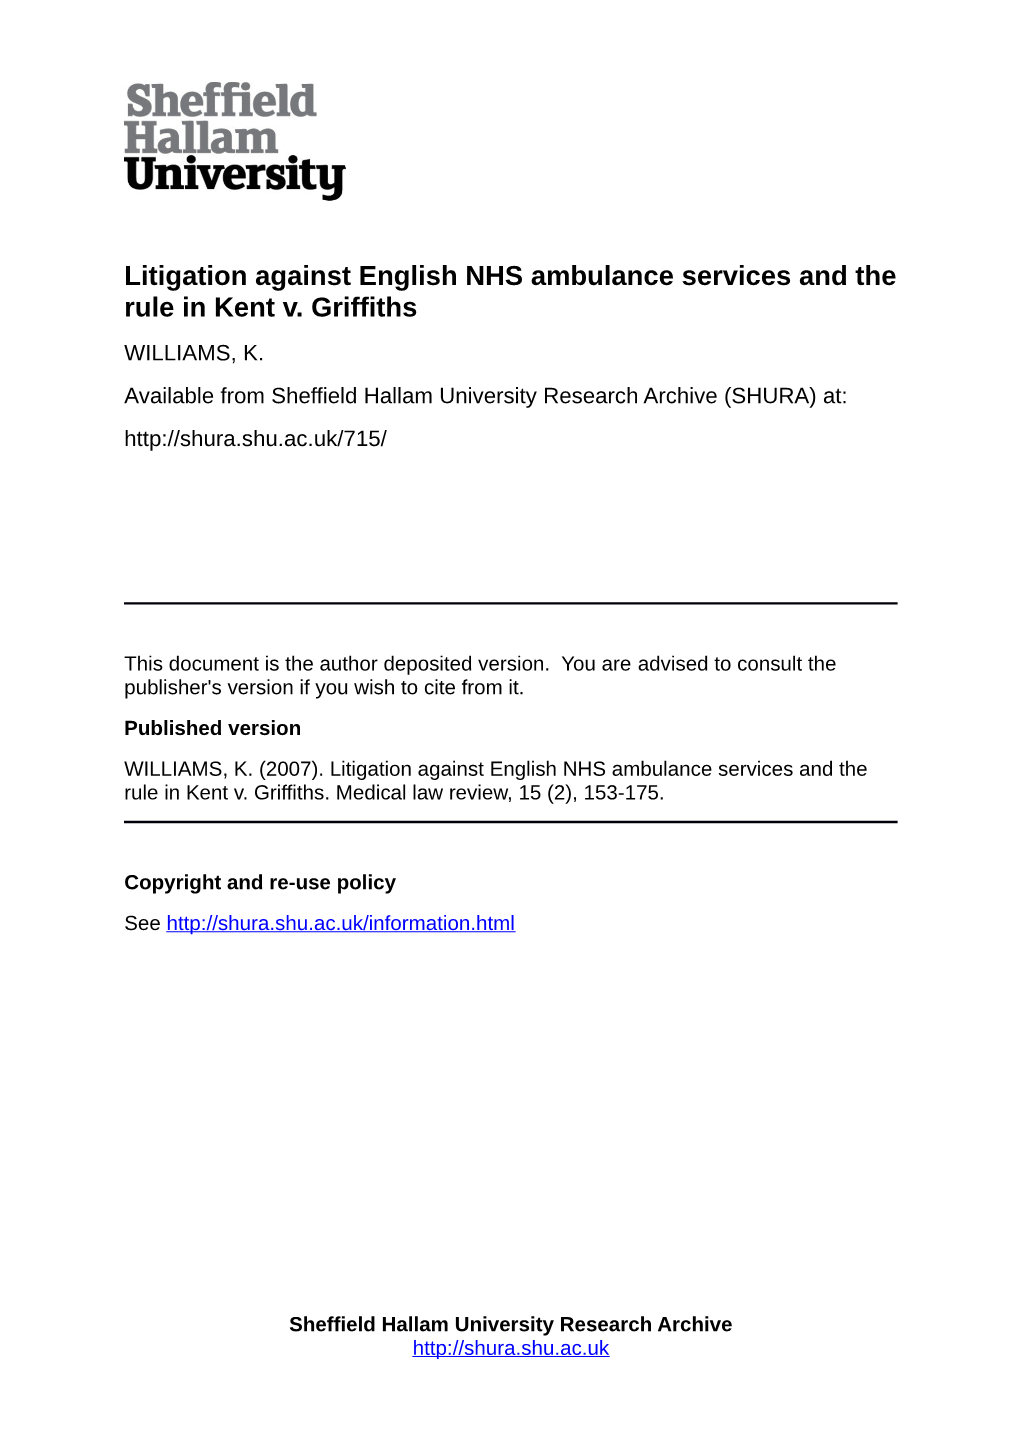 Litigation Against English NHS Ambulance Services and the Rule in Kent V